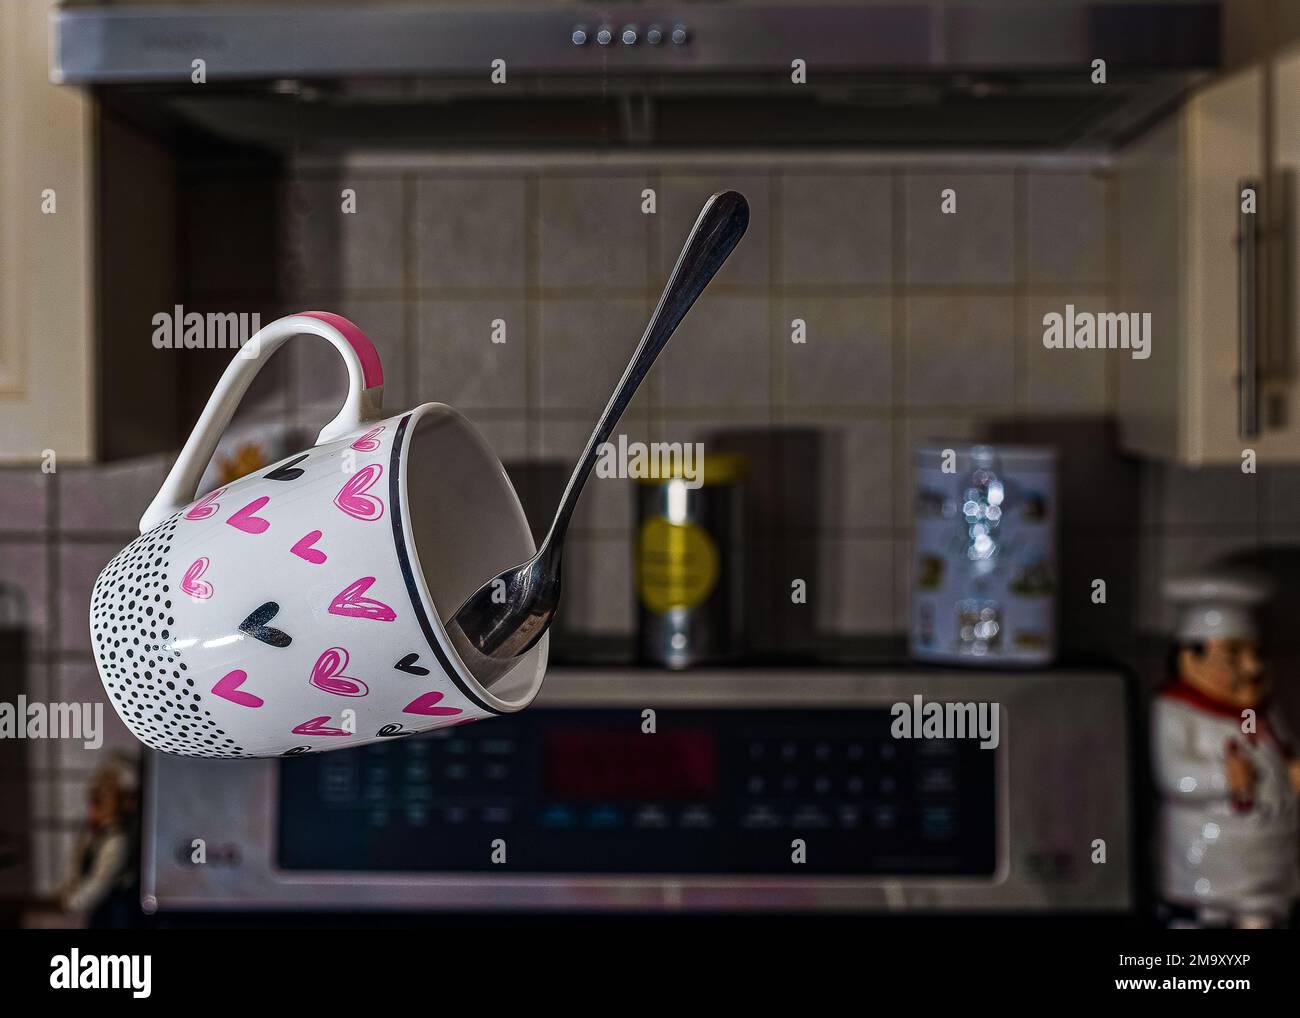 A flying coffee mug with a spoon in the kitchen. Kitchen revolutions and morning dreams. Stock Photo